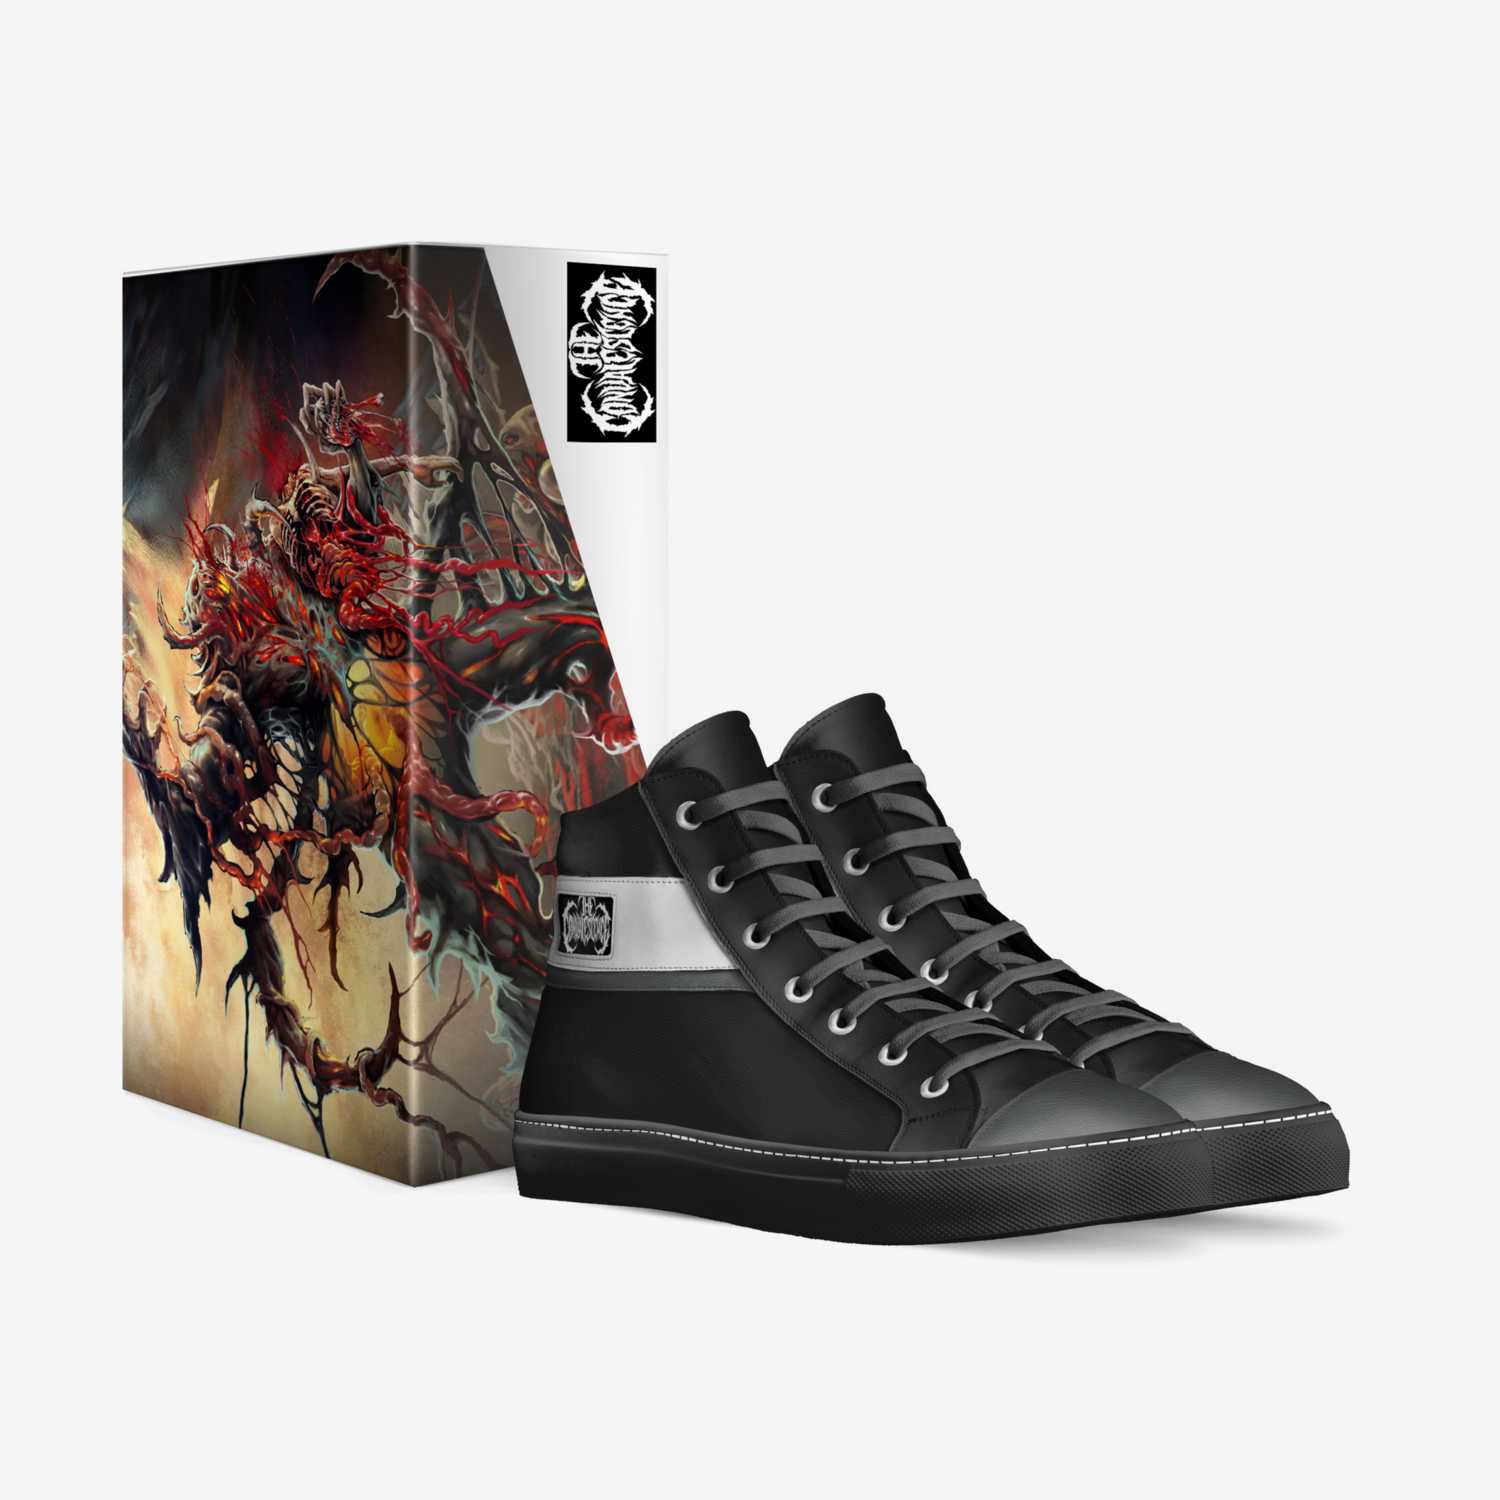 Nightmares custom made in Italy shoes by Micheal vanburen Sellers | Box view